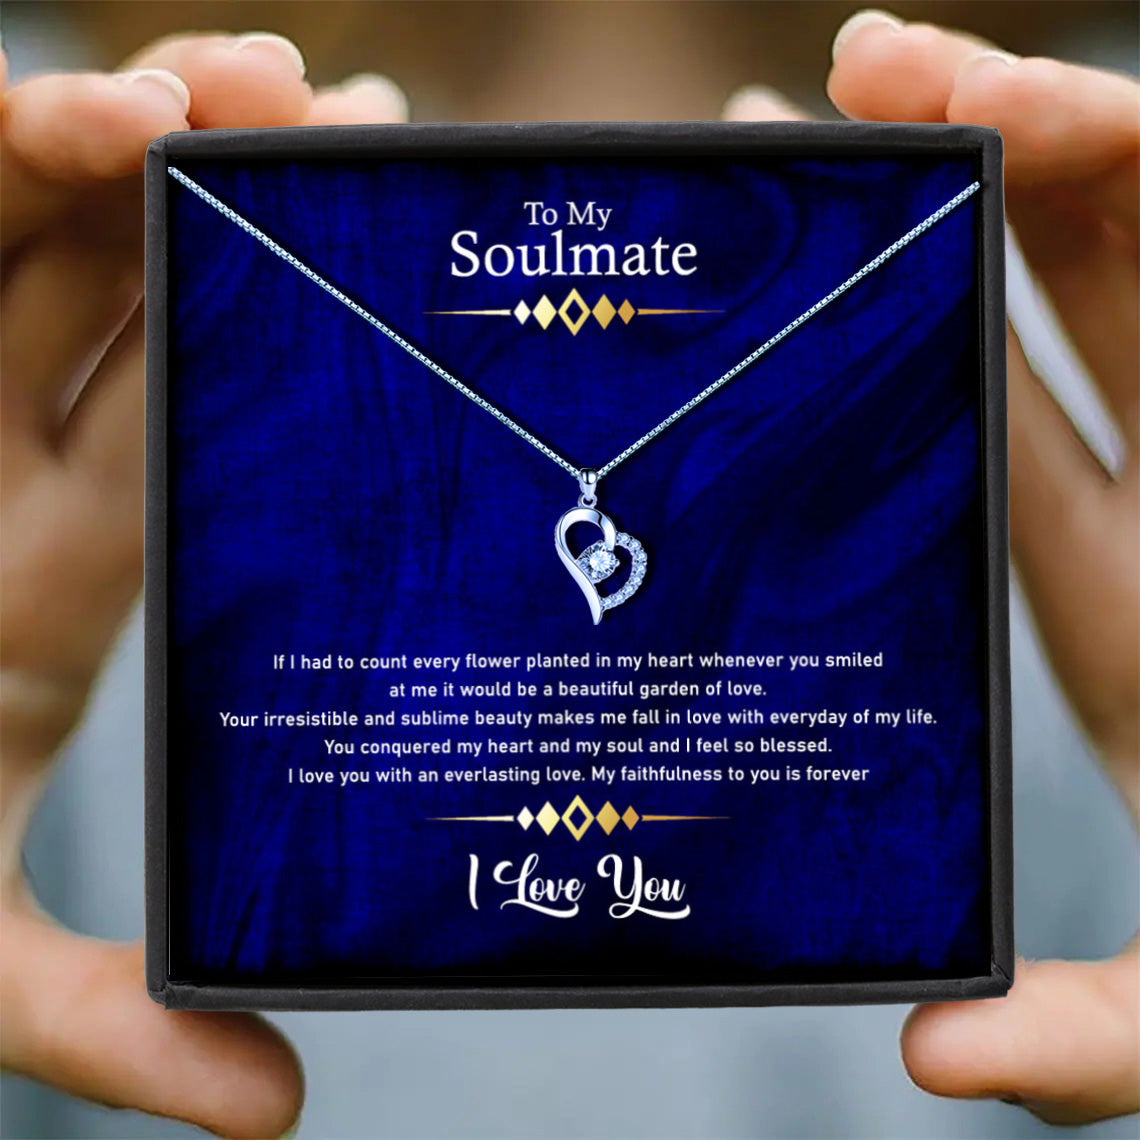 To My Soulmate - Elegant Royal Blue Message Necklace